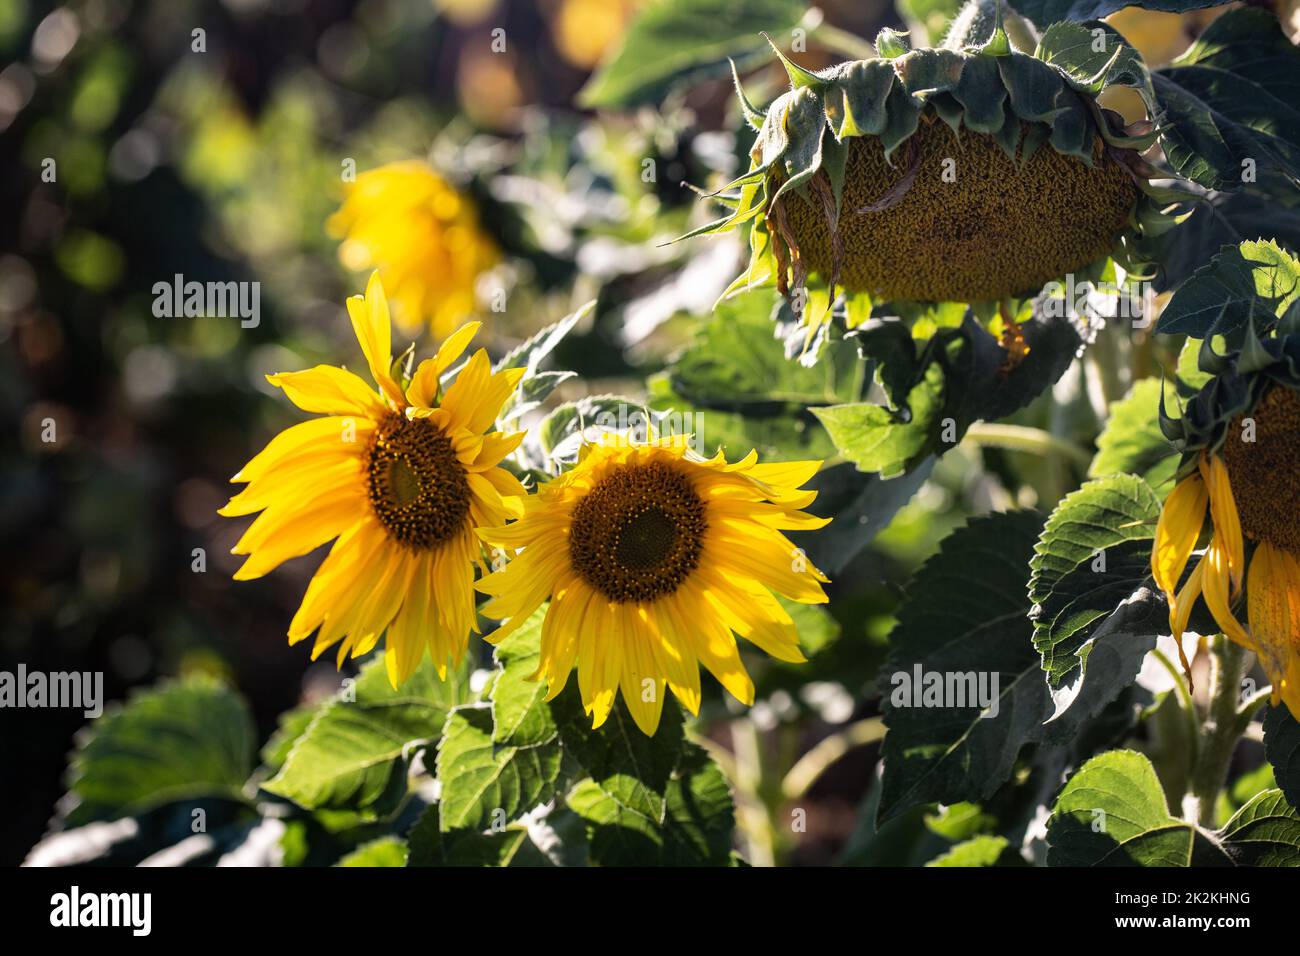 Wilted Sunflowers on a sunny day at the beginning of autumn Stock Photo